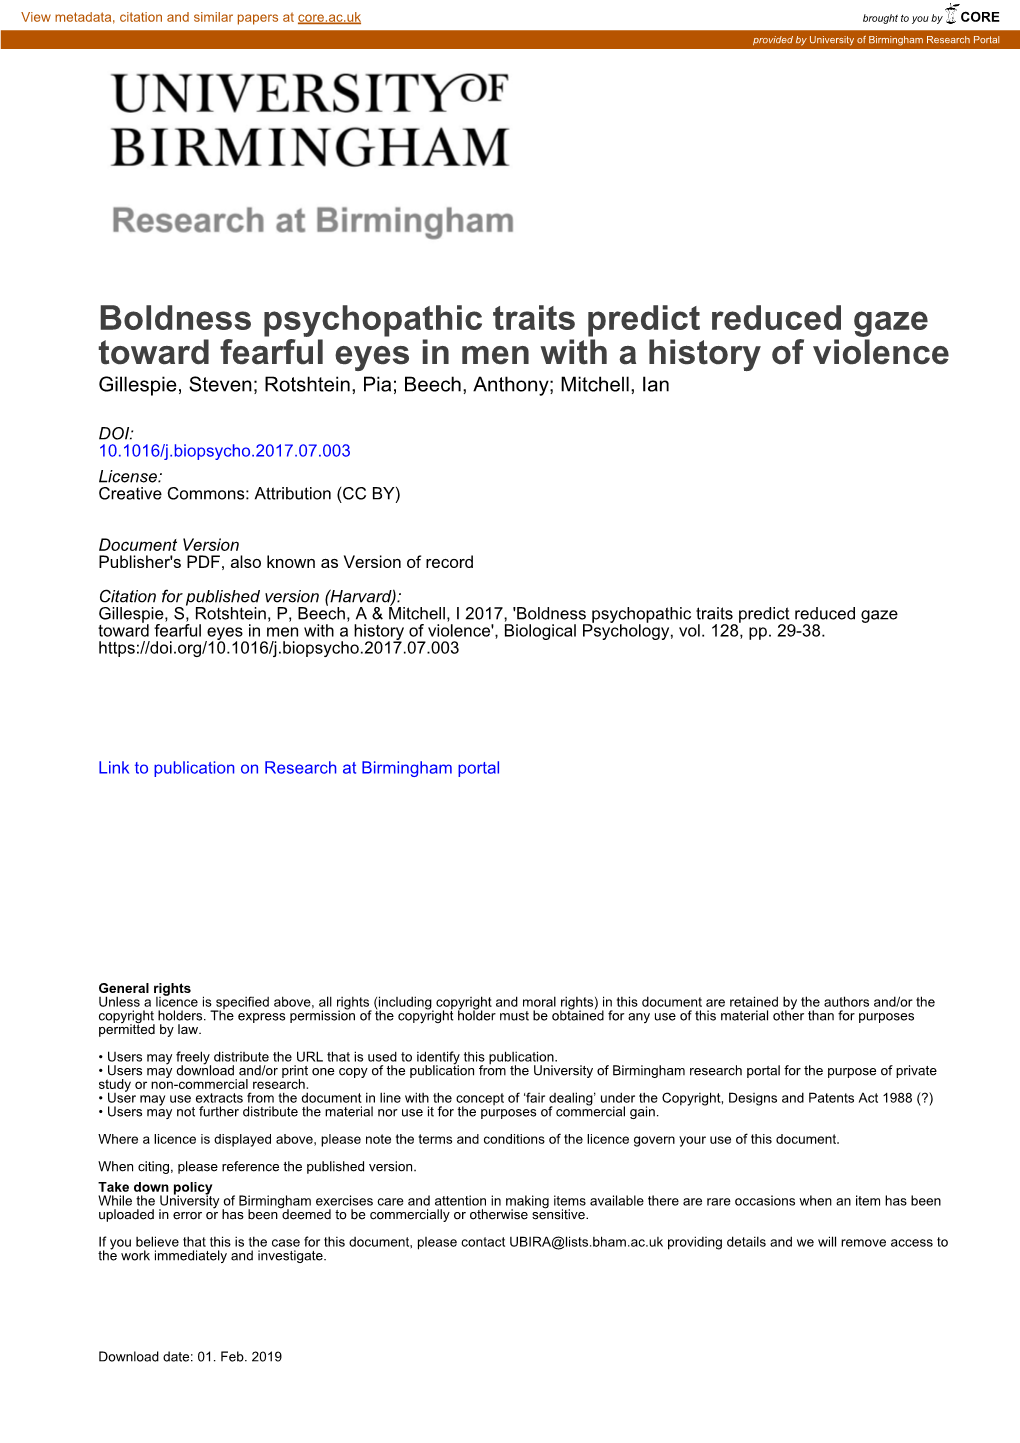 Boldness Psychopathic Traits Predict Reduced Gaze Toward Fearful Eyes in Men with a History of Violence